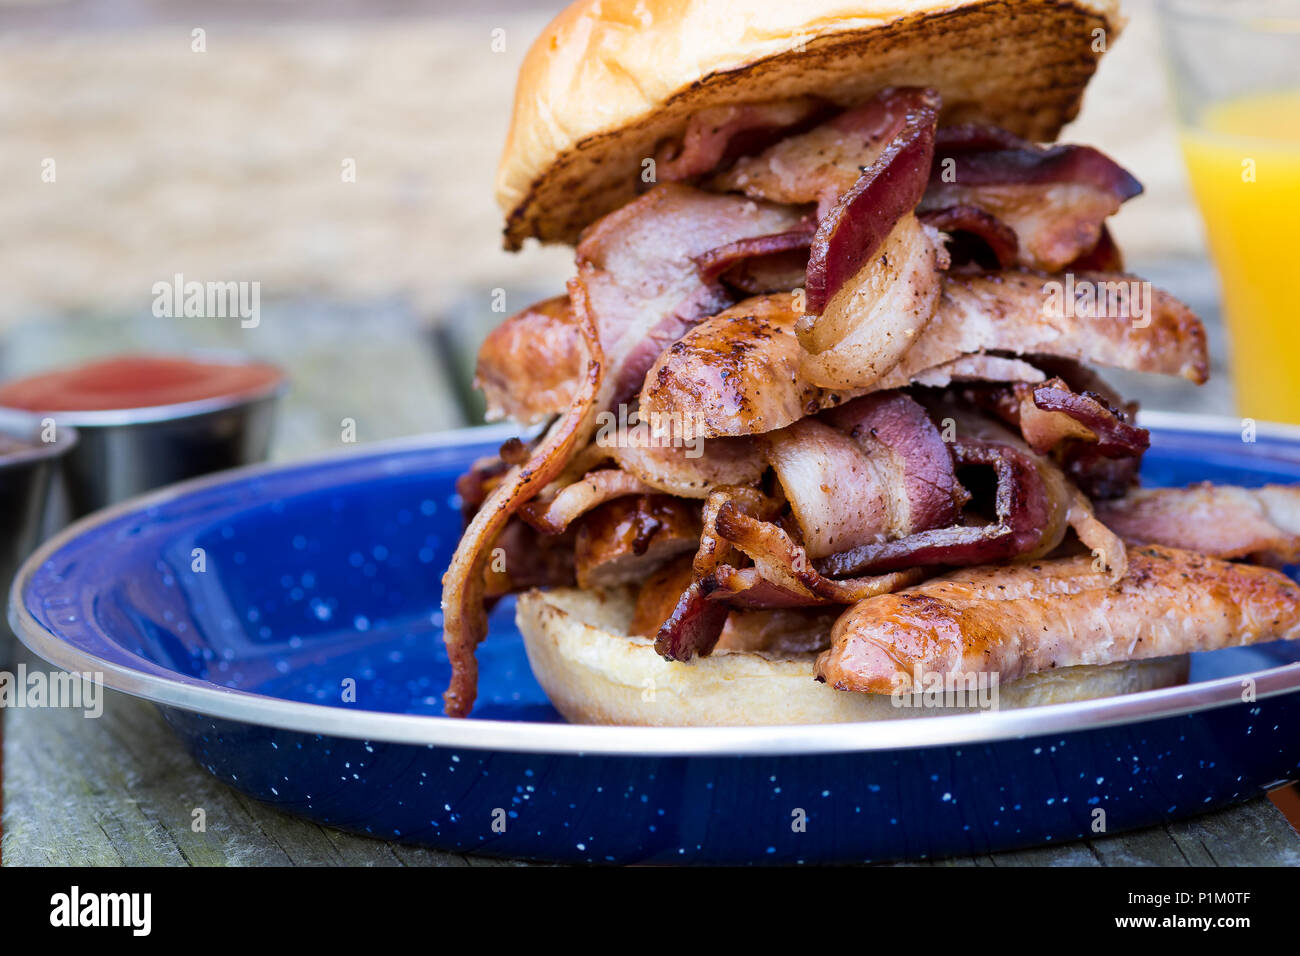 Sausage & Streaky Bacon in a brioche bun, with sauces and orange juice Stock Photo